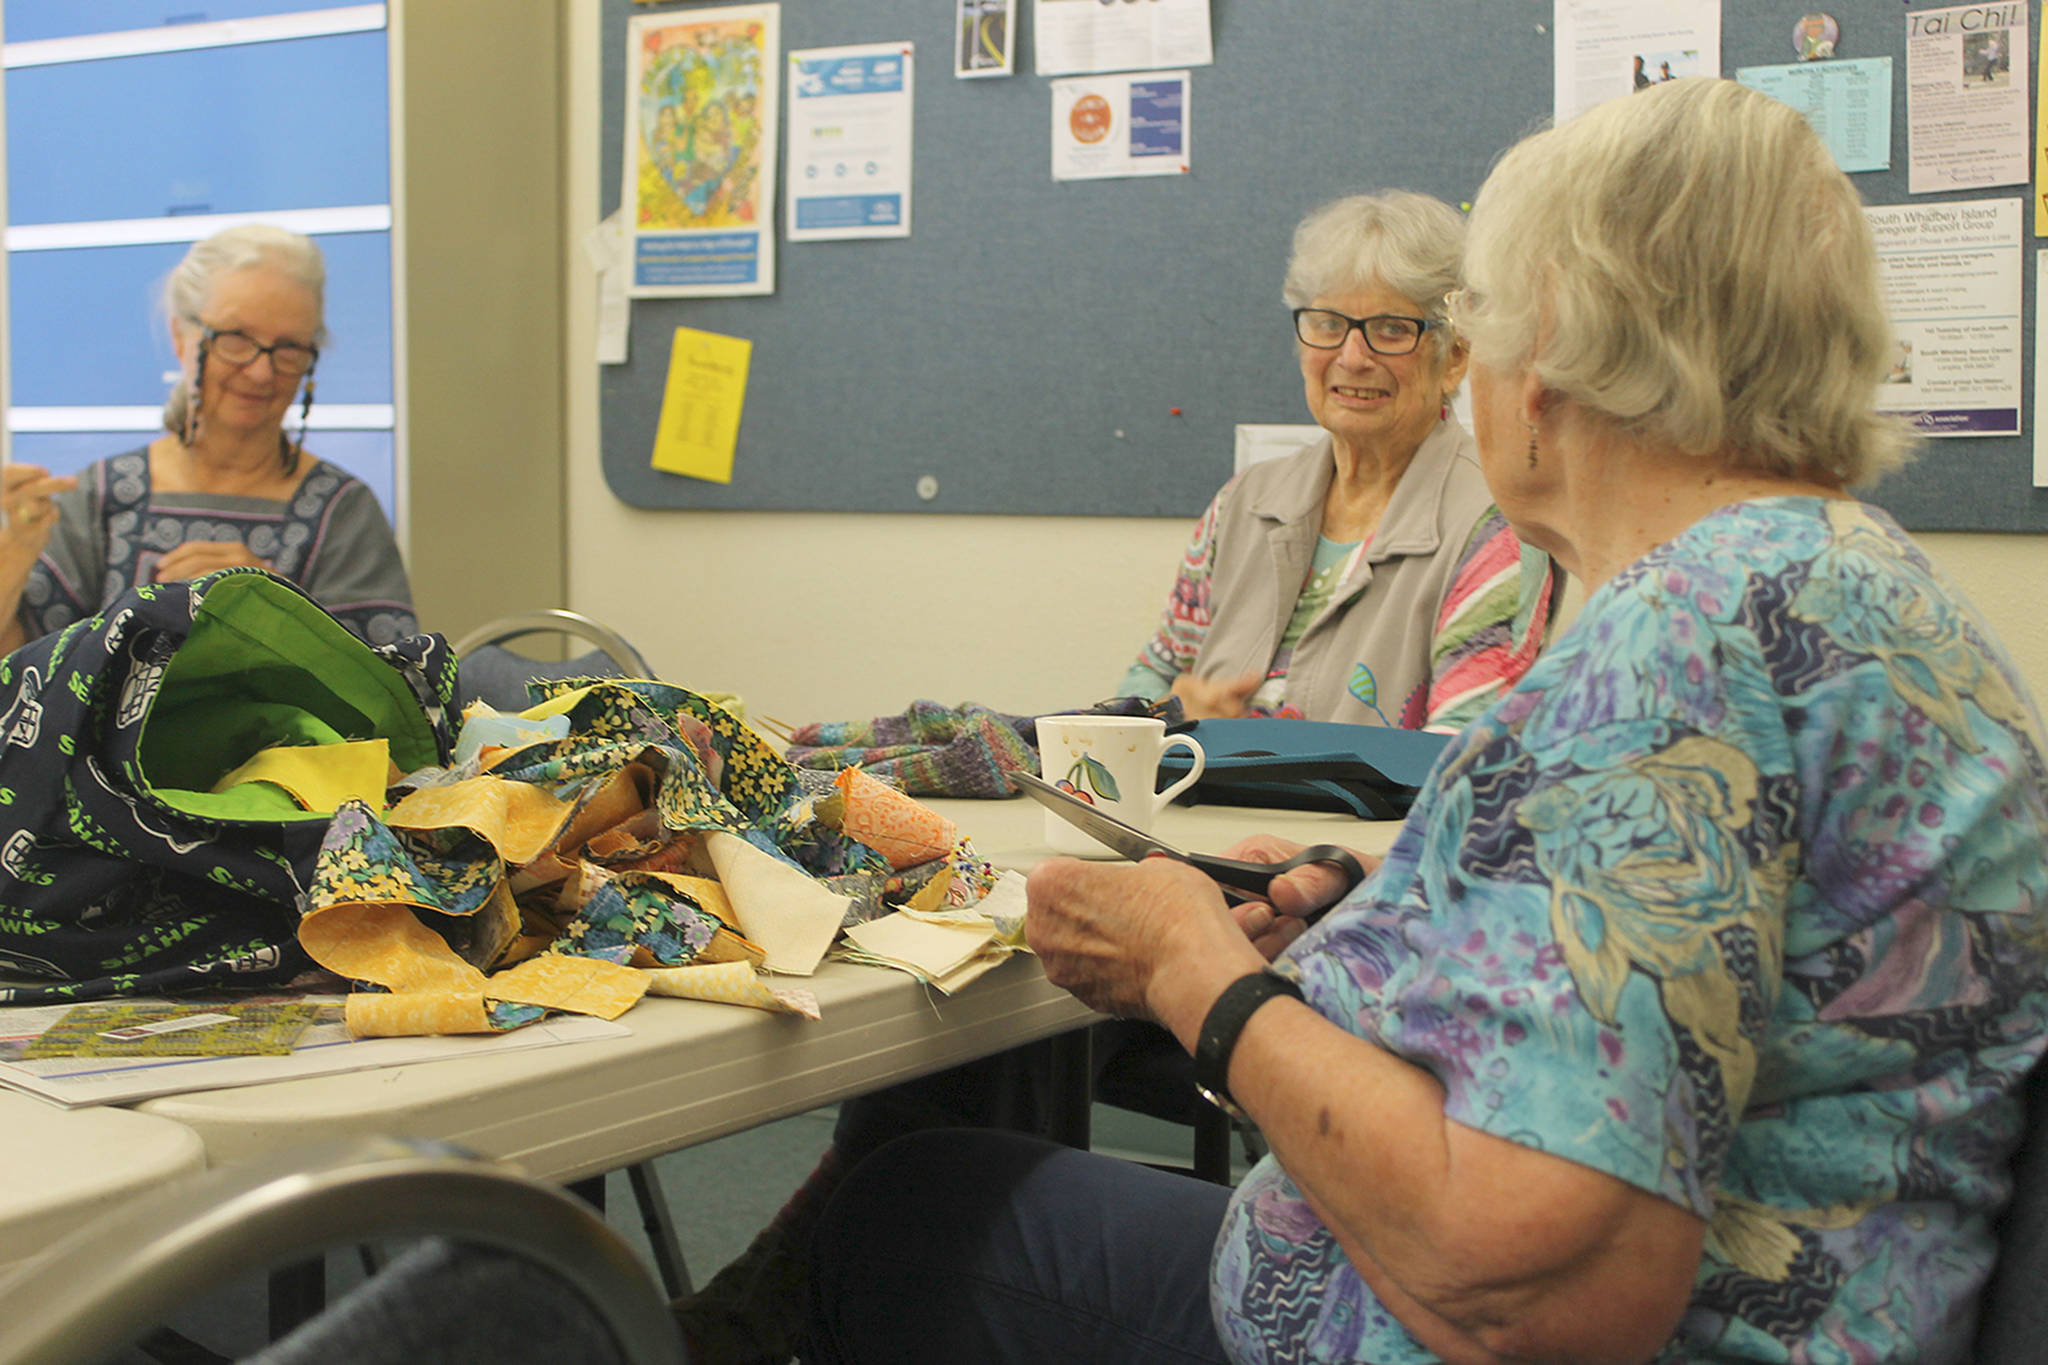 Crazy Quilters sew with charitable, social purposes